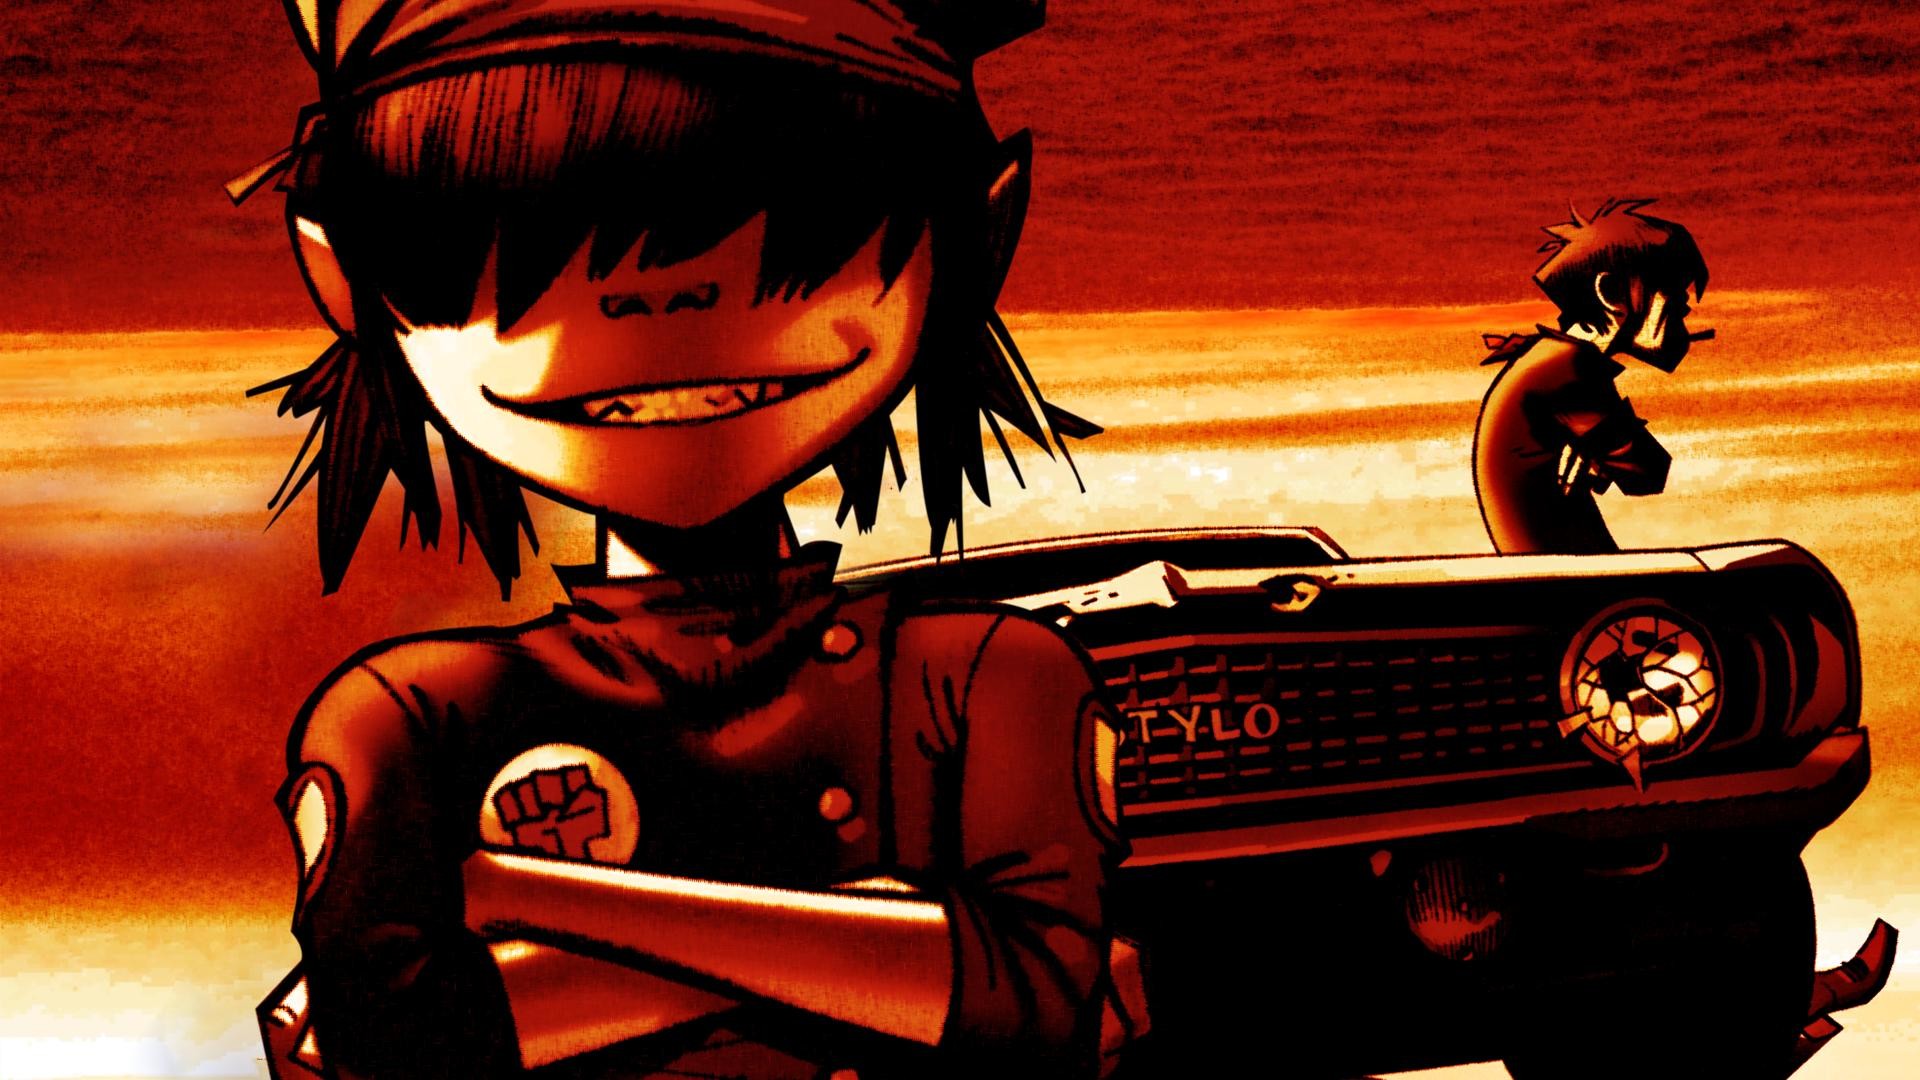 1920x1080 Attractive Super High Quality Background Images of Gorillaz,  ...